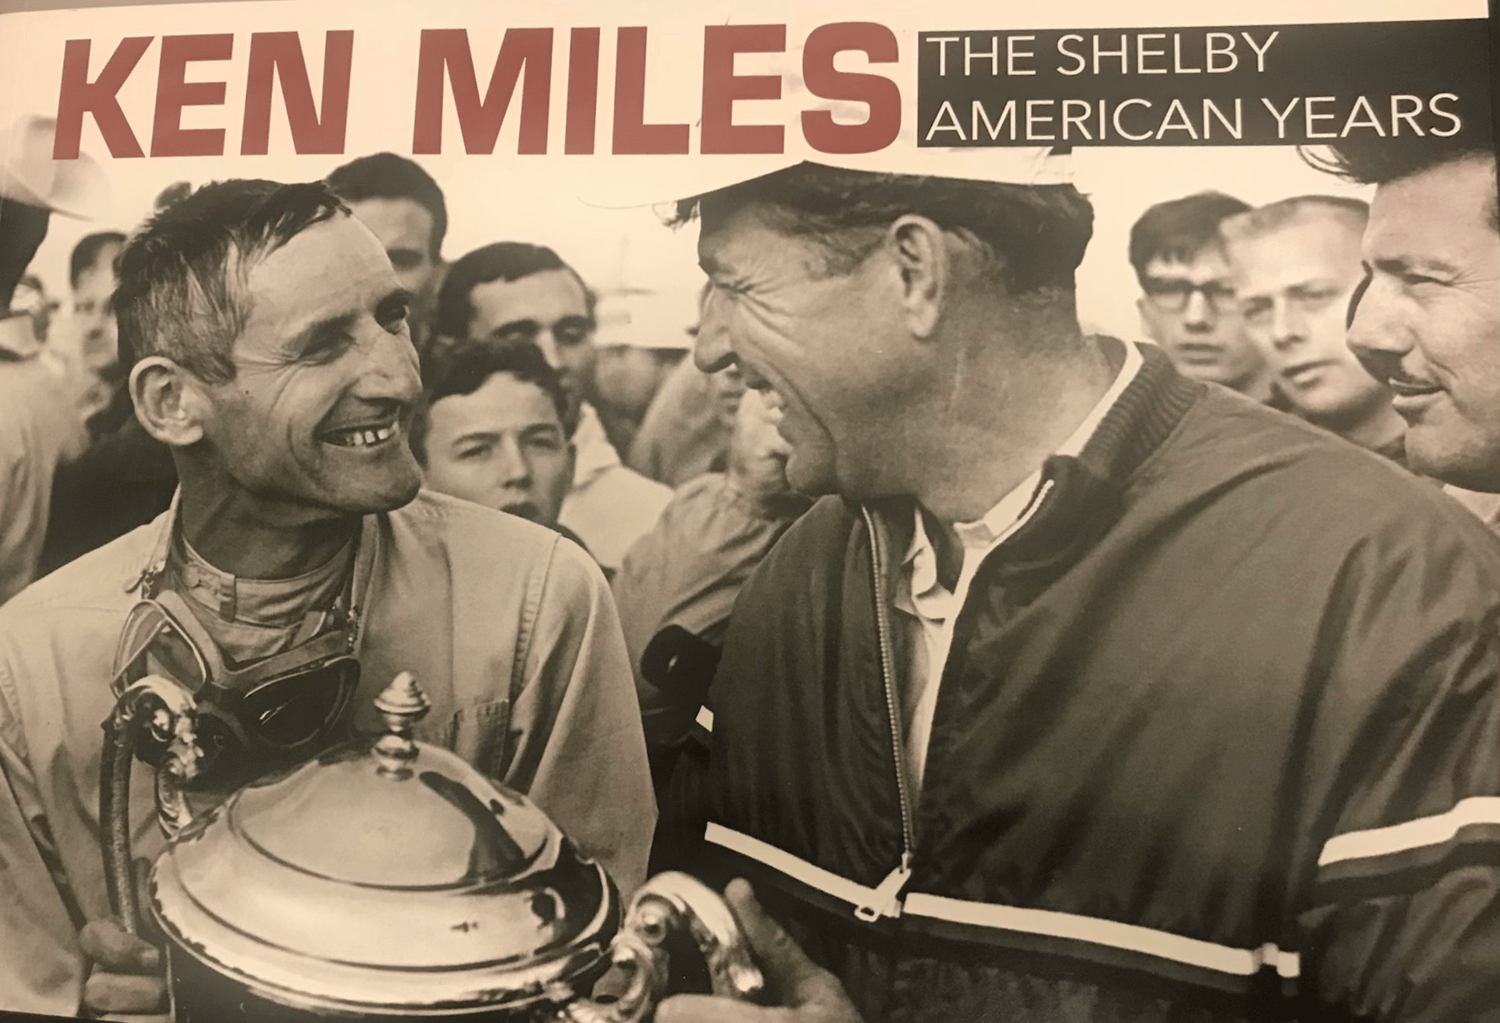 Image of Ken Miles - The Shelby American Years (book) 